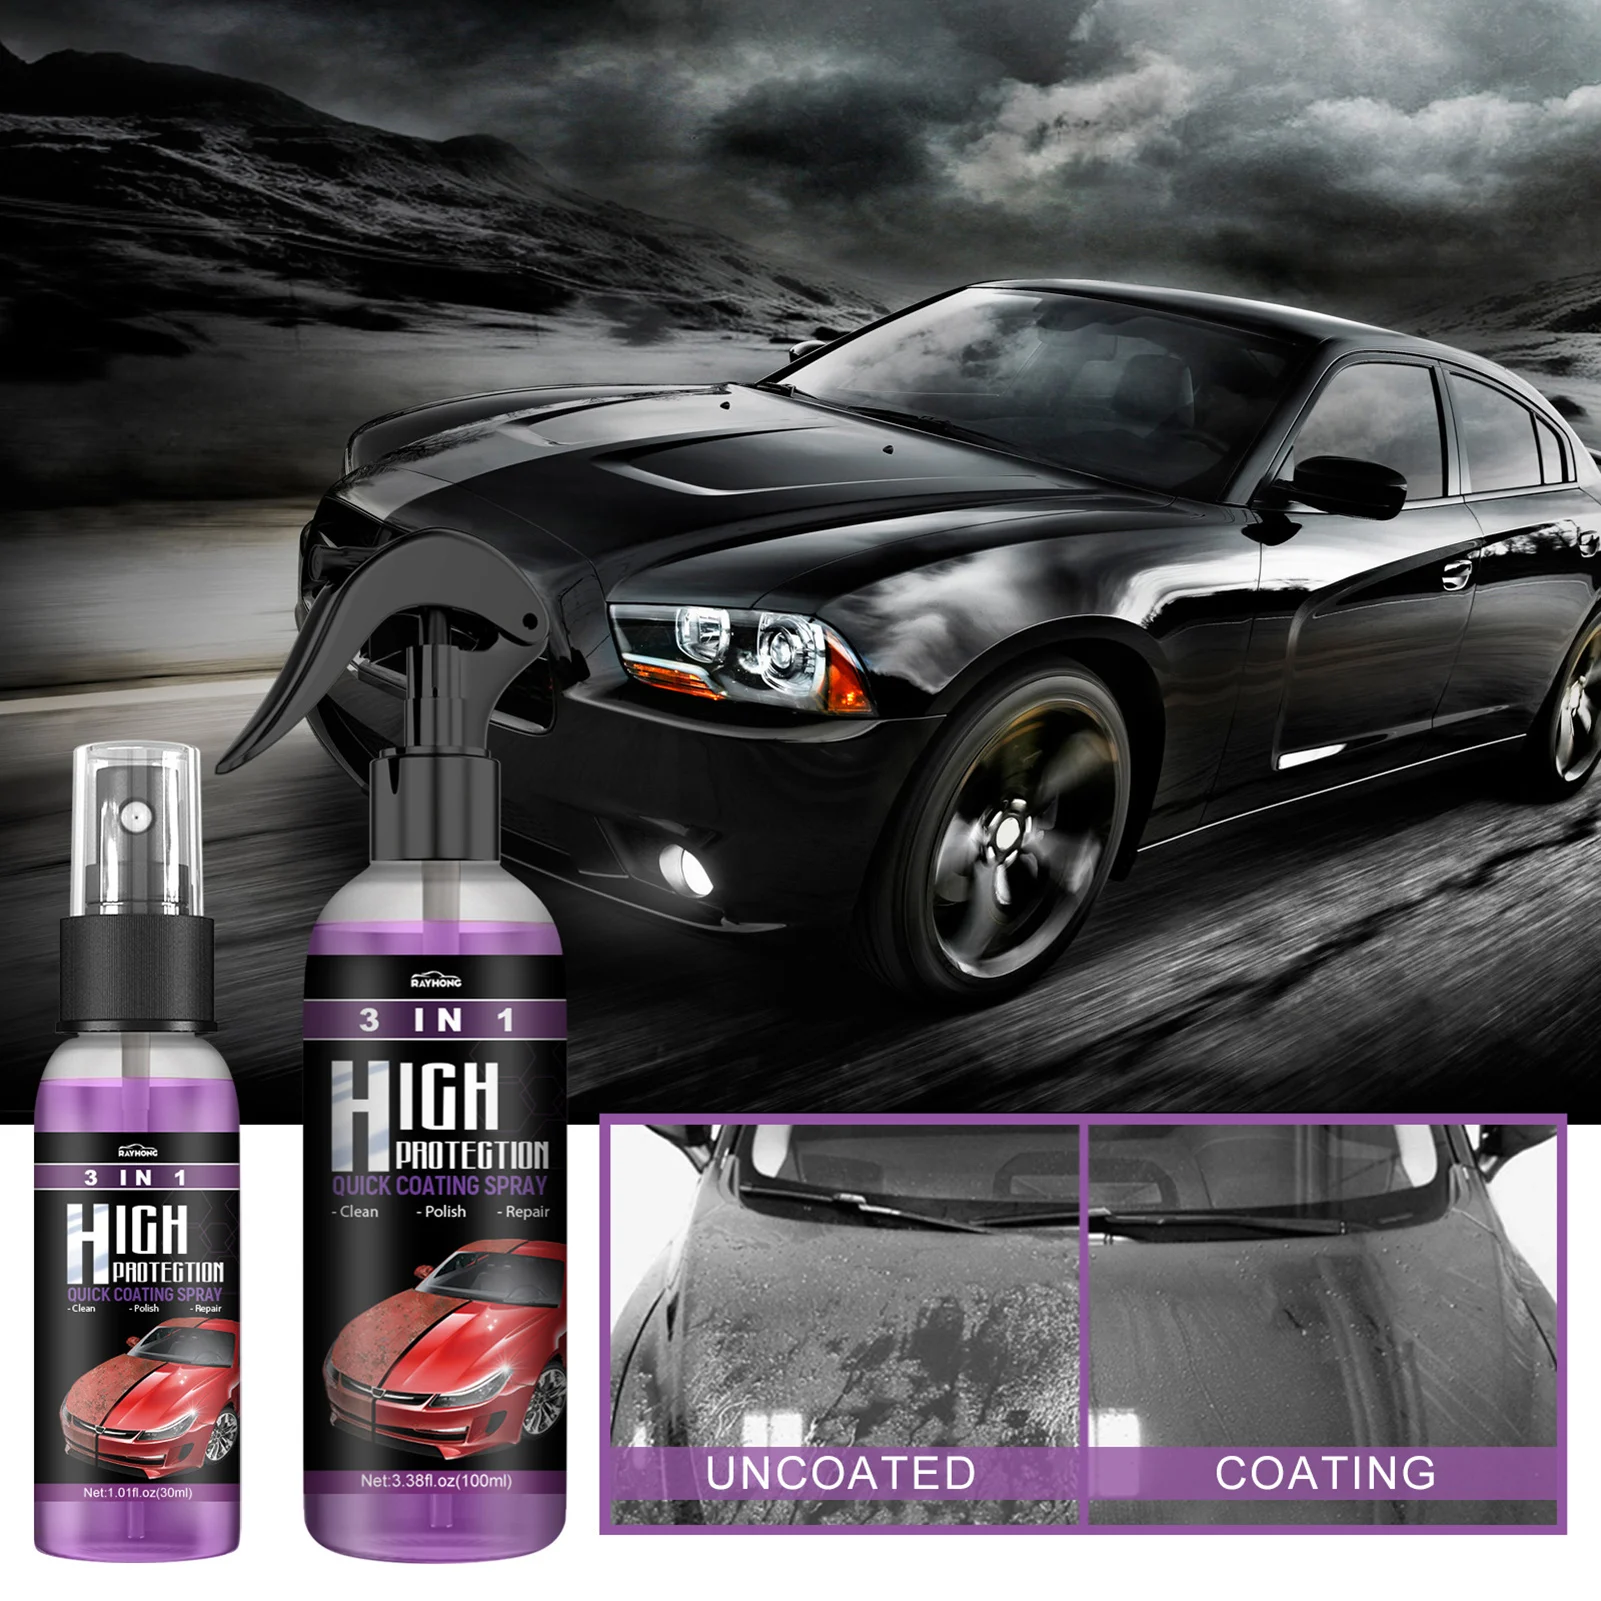 H4Cacle-H3 Car Paint Waterproof Car Paint Fast Coating Agent, Prevention of  Sewage/Radiation Hazards, Protecting Cars - AliExpress